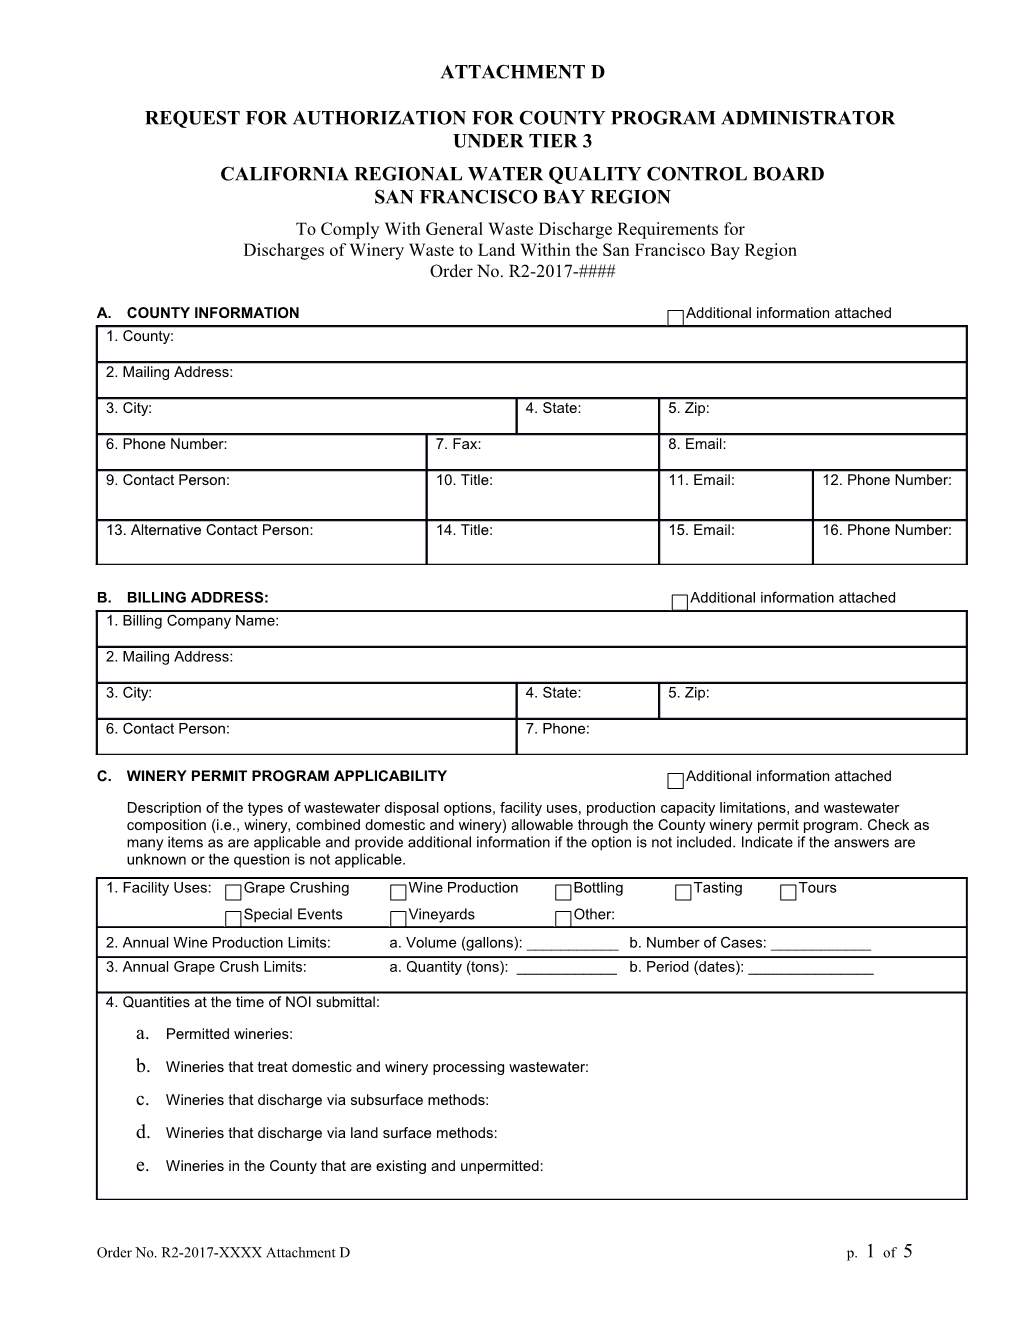 Request for Authorization for Countyprogram Administrator